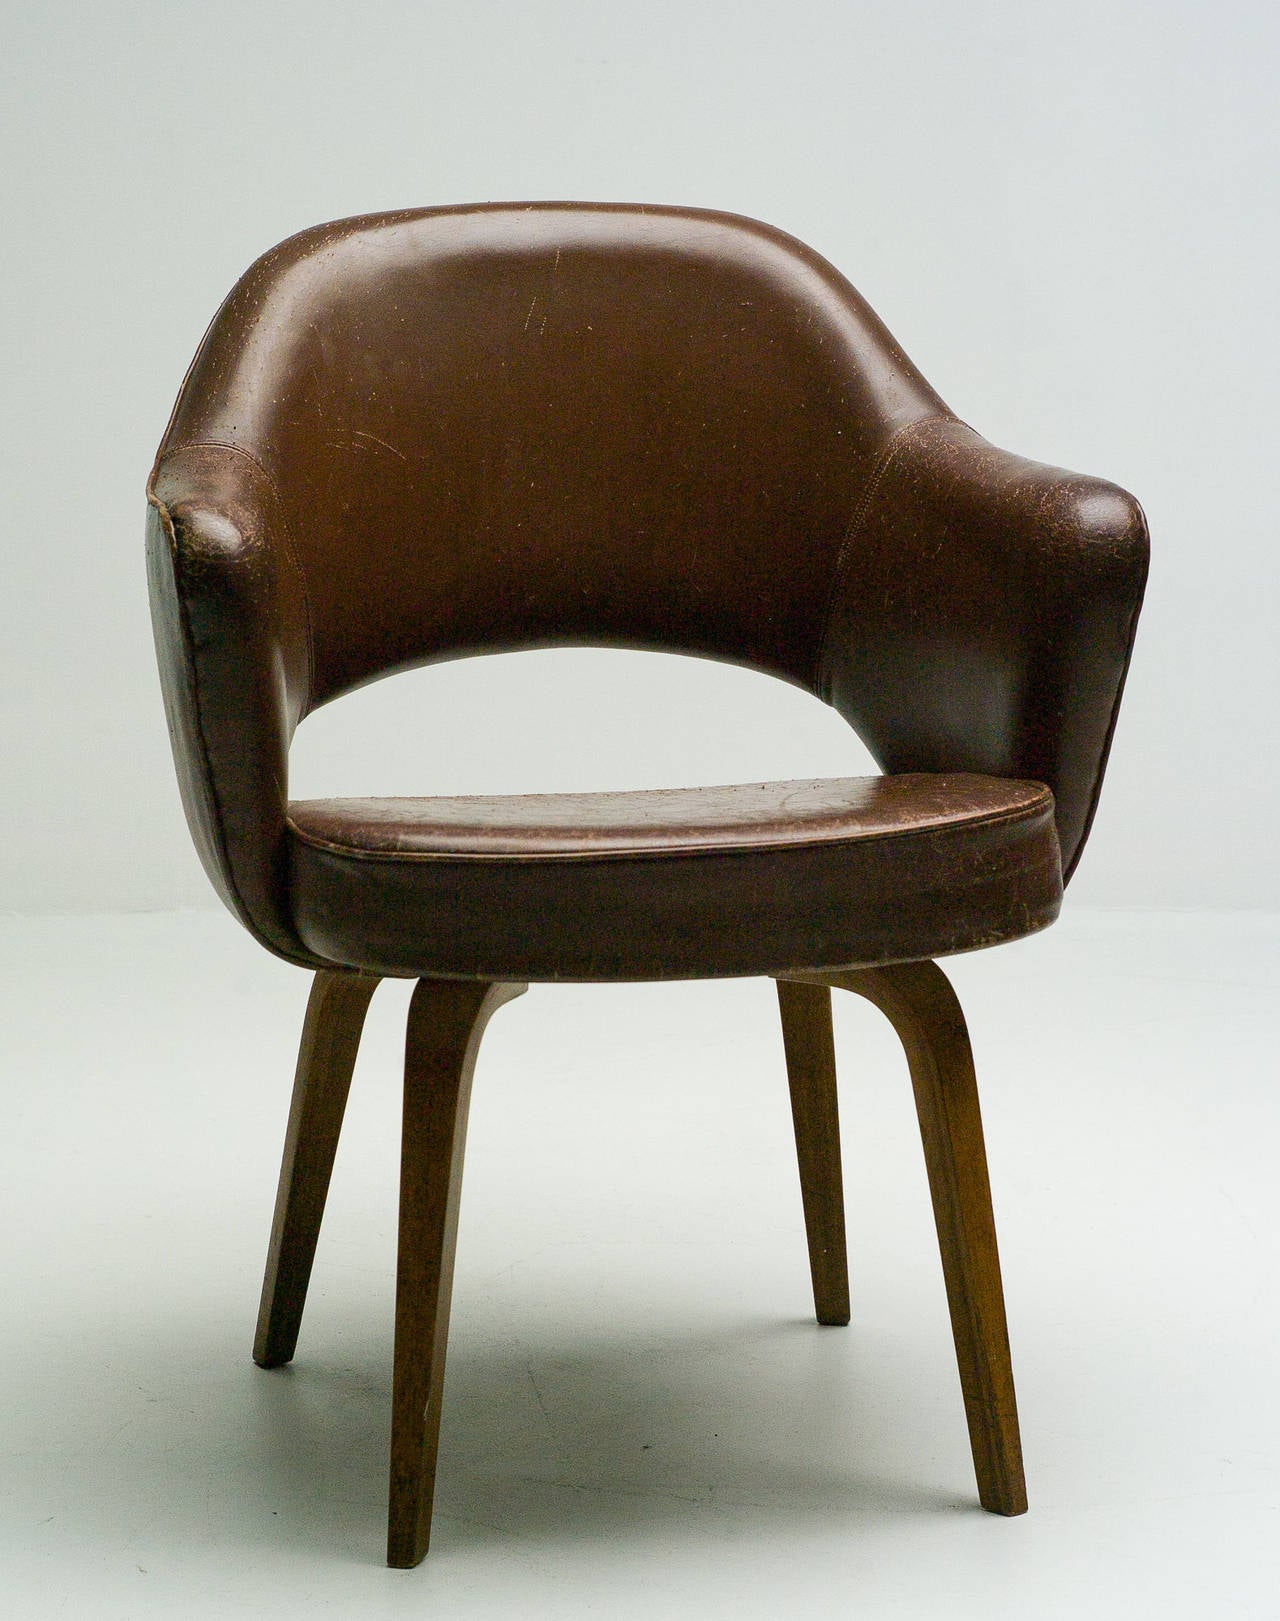 Executive armchair by Eero Saarinen with wooden legs and dark brown leather.
Competitive worldwide shipping available. Please ask for our in-house crating and shipping services.